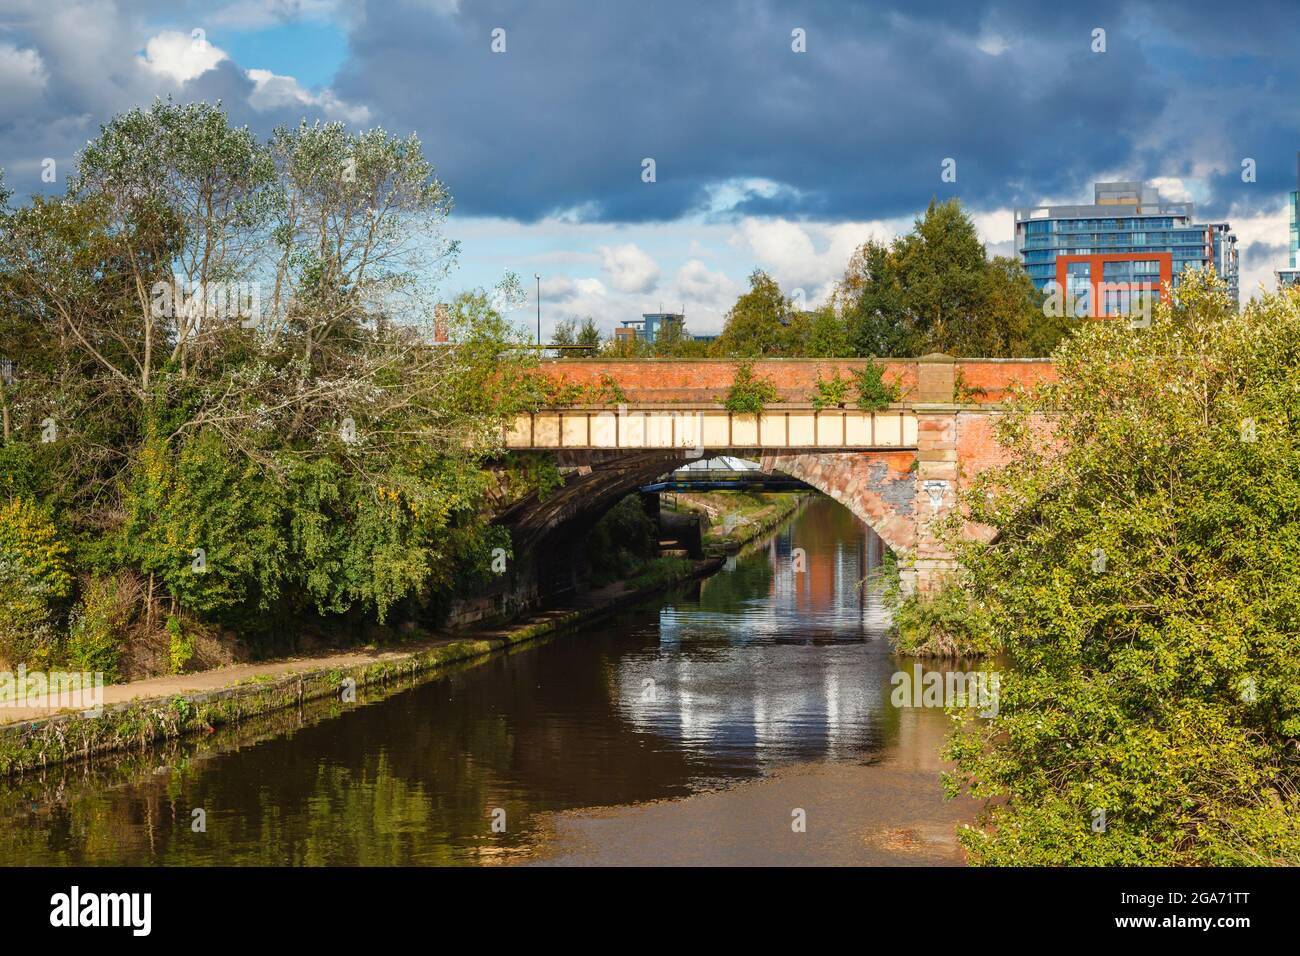 Castlefield Viaduct railway bridge crossing over the River Irwell between Salford and Castlefield, Manchester, north-west England, UK Stock Photo